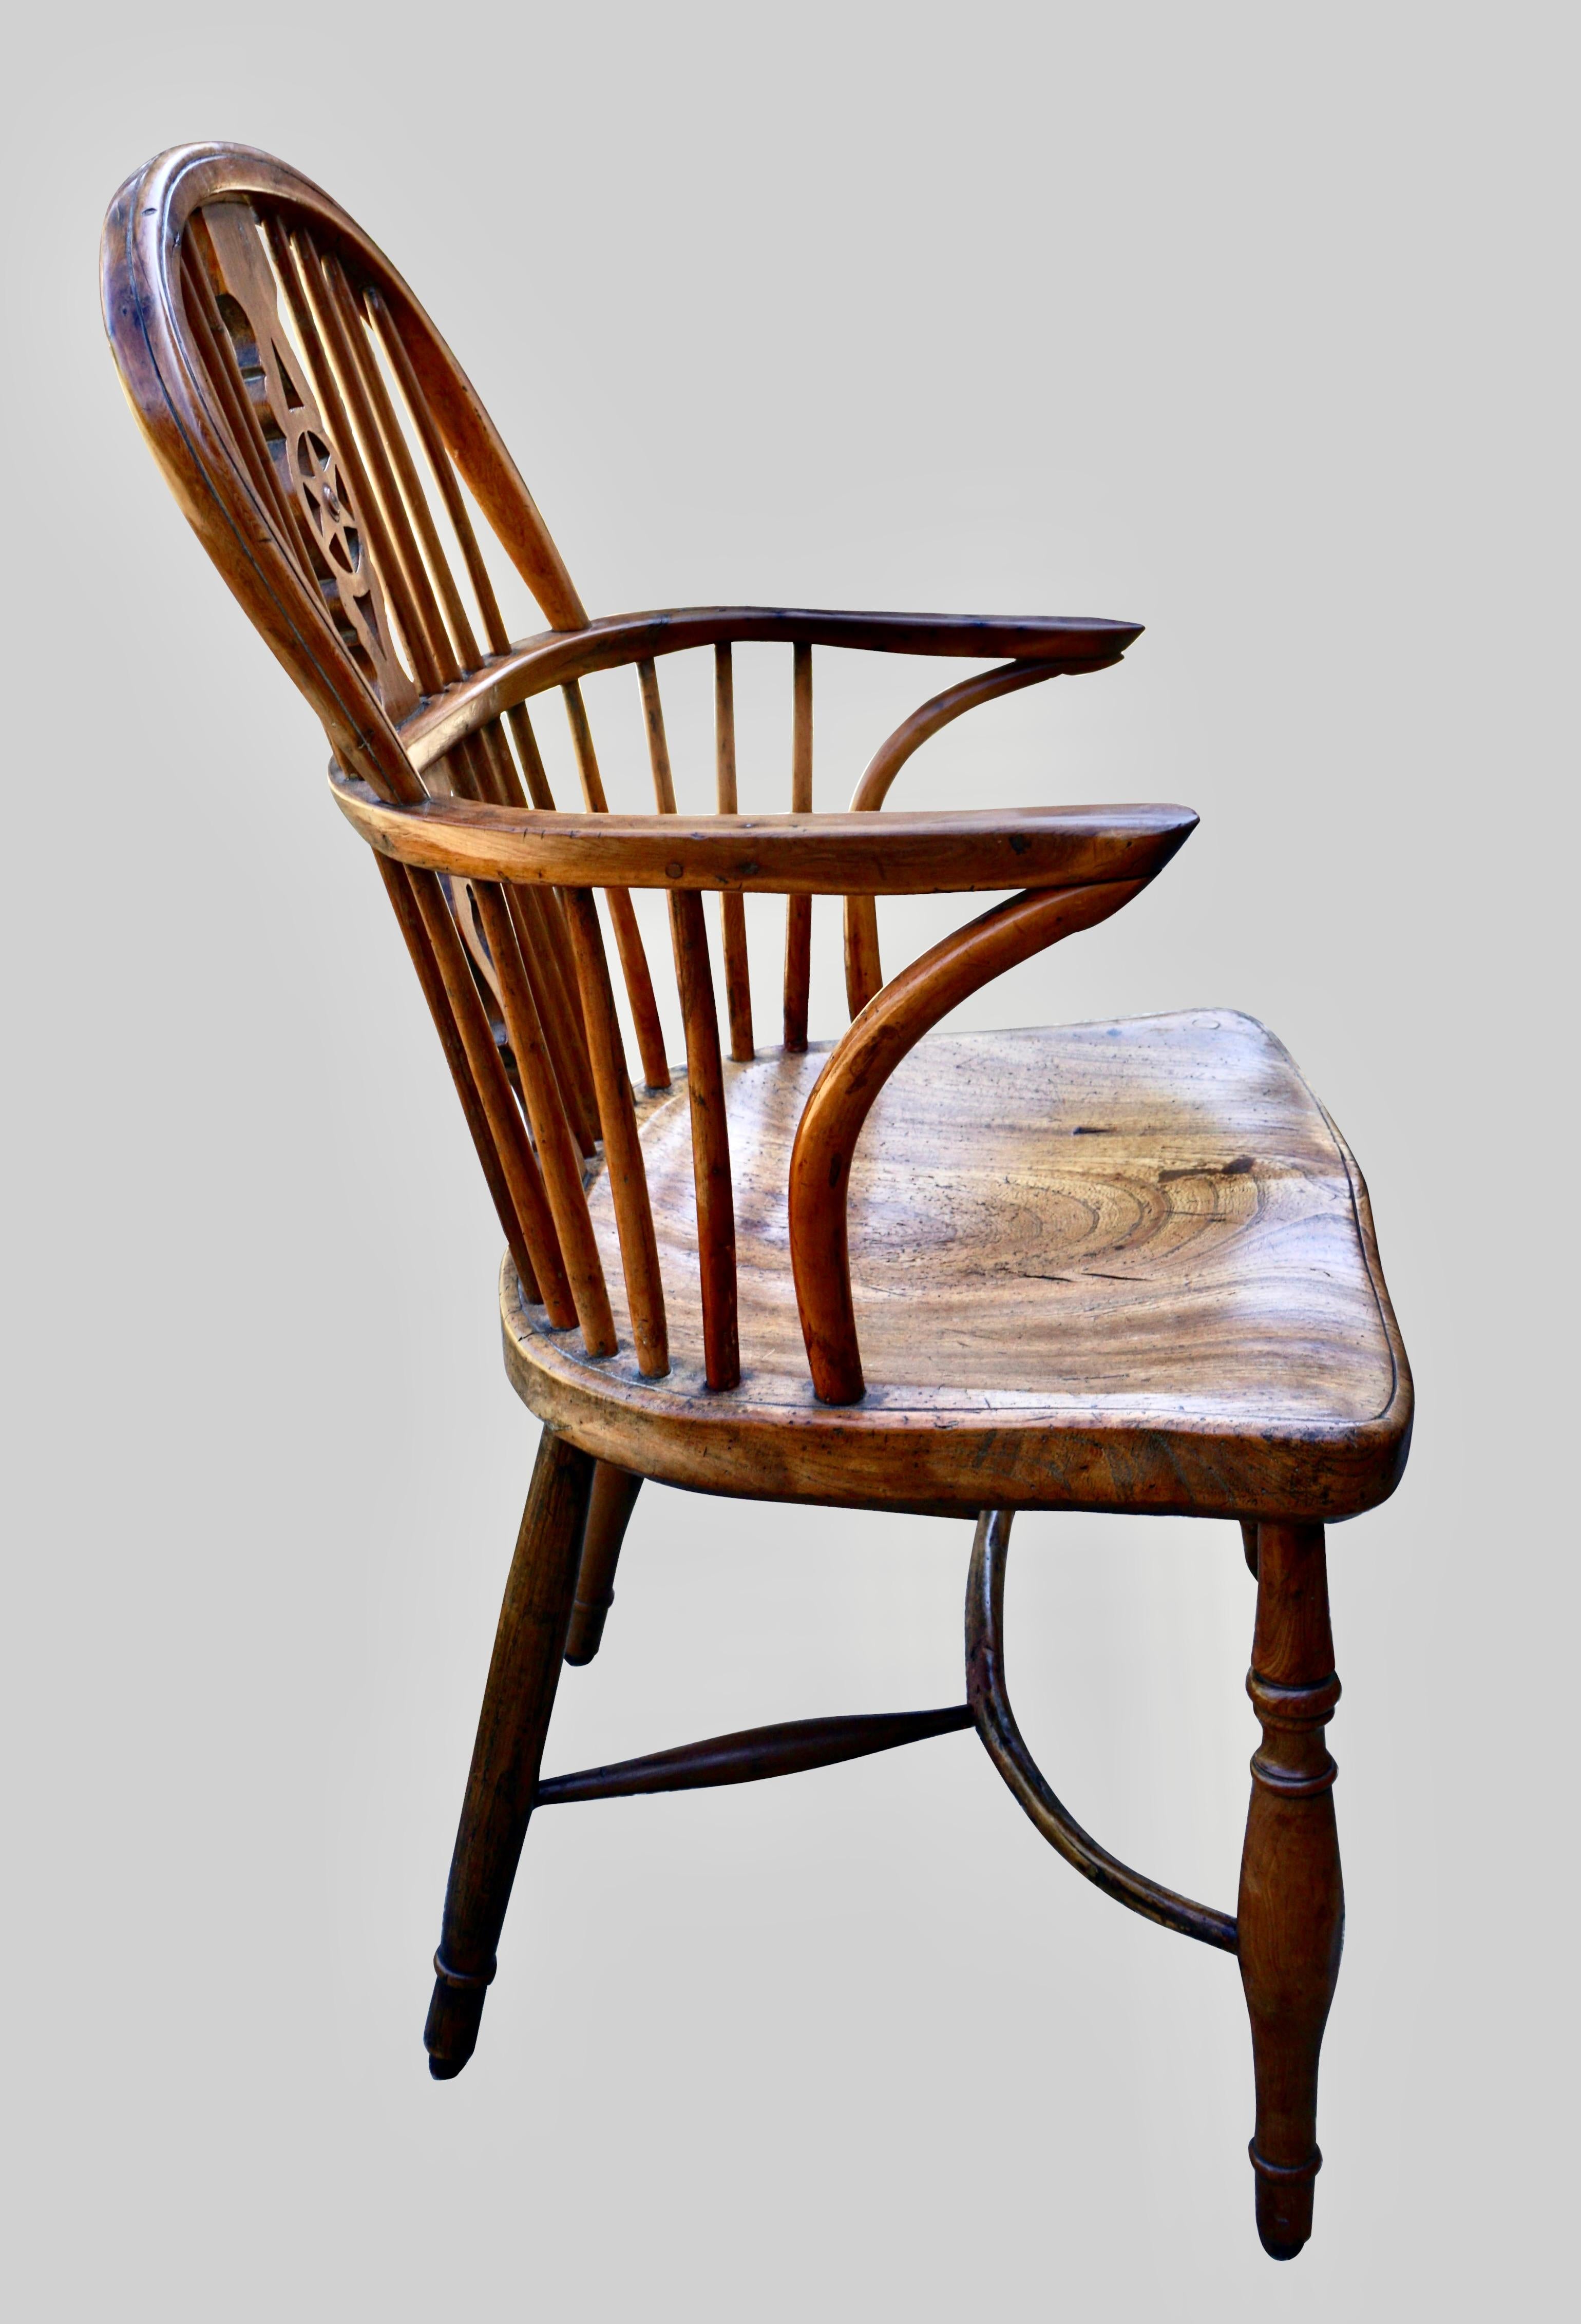 Rustic English Yew Wood Low Back Windsor Arm Chair